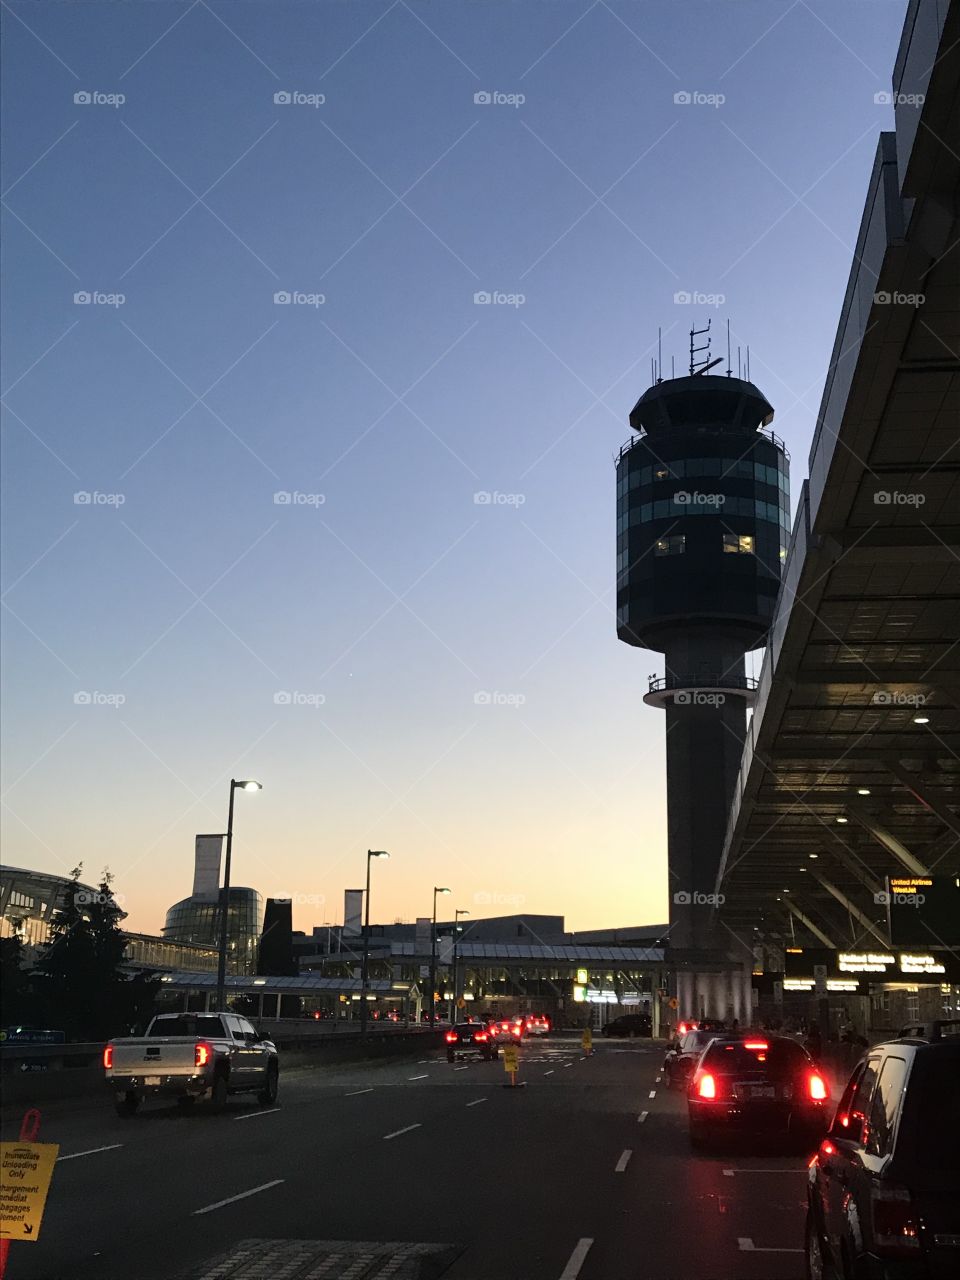 Nothing beats being at the airport before the world wakes up #travel #airport #yvr #readyforvacation #vacation #transportation #sunrise #departures #fromthegroundup #earlyriser 